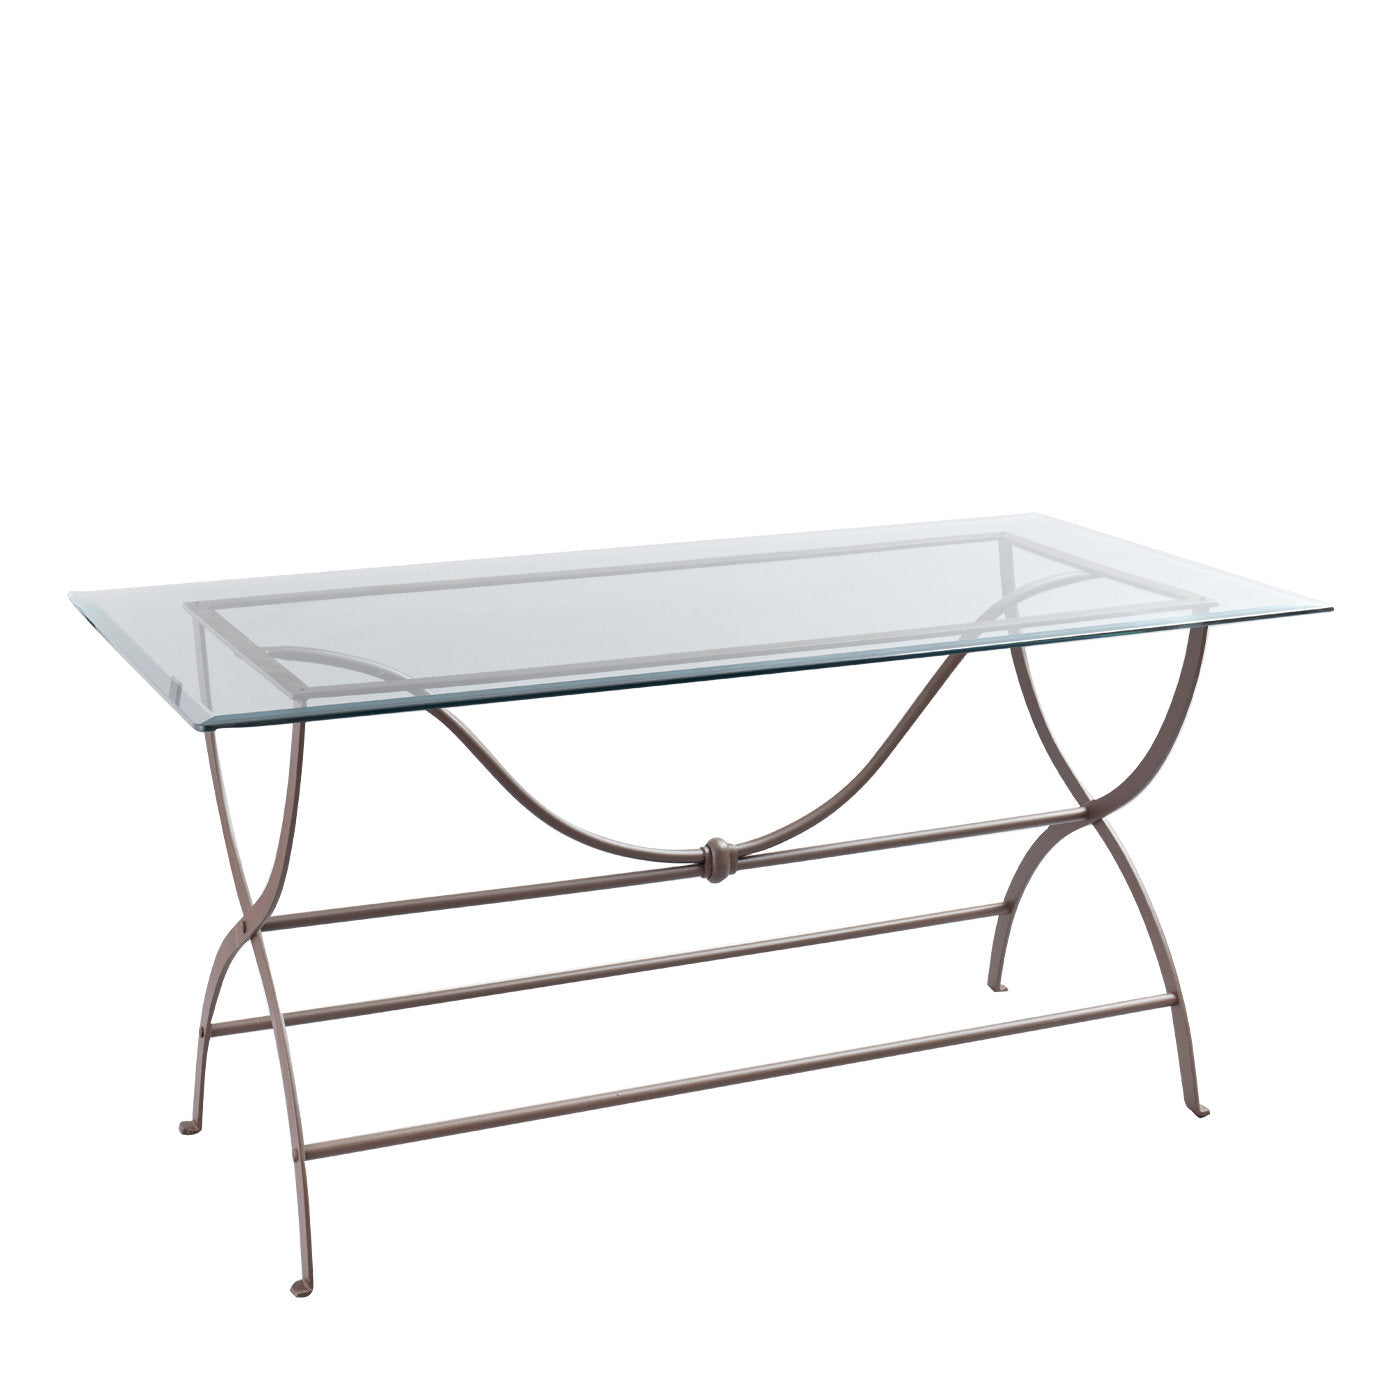 Due Lamiere Table in Stainless Steel - Main view